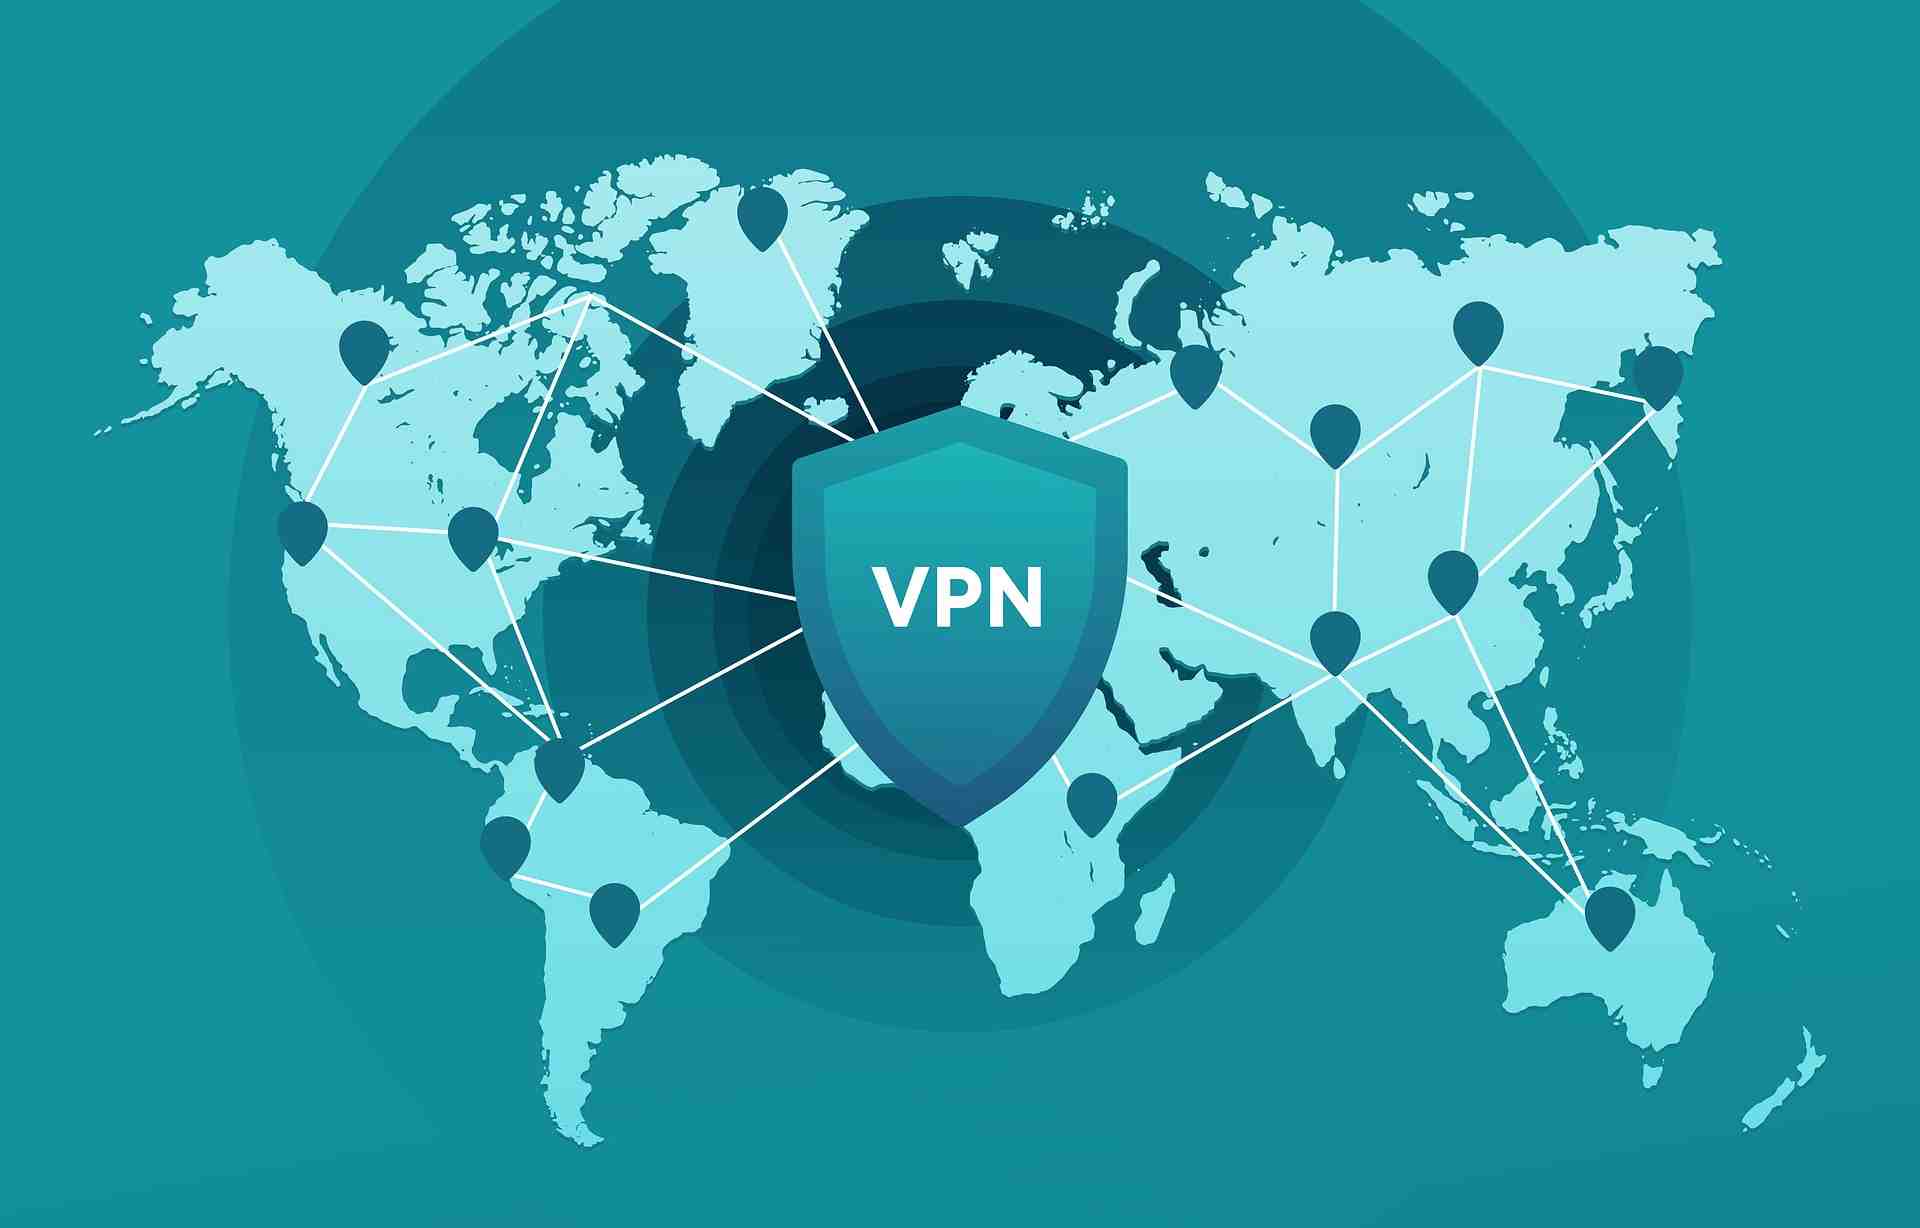 How do I know if I have a VPN on my phone?